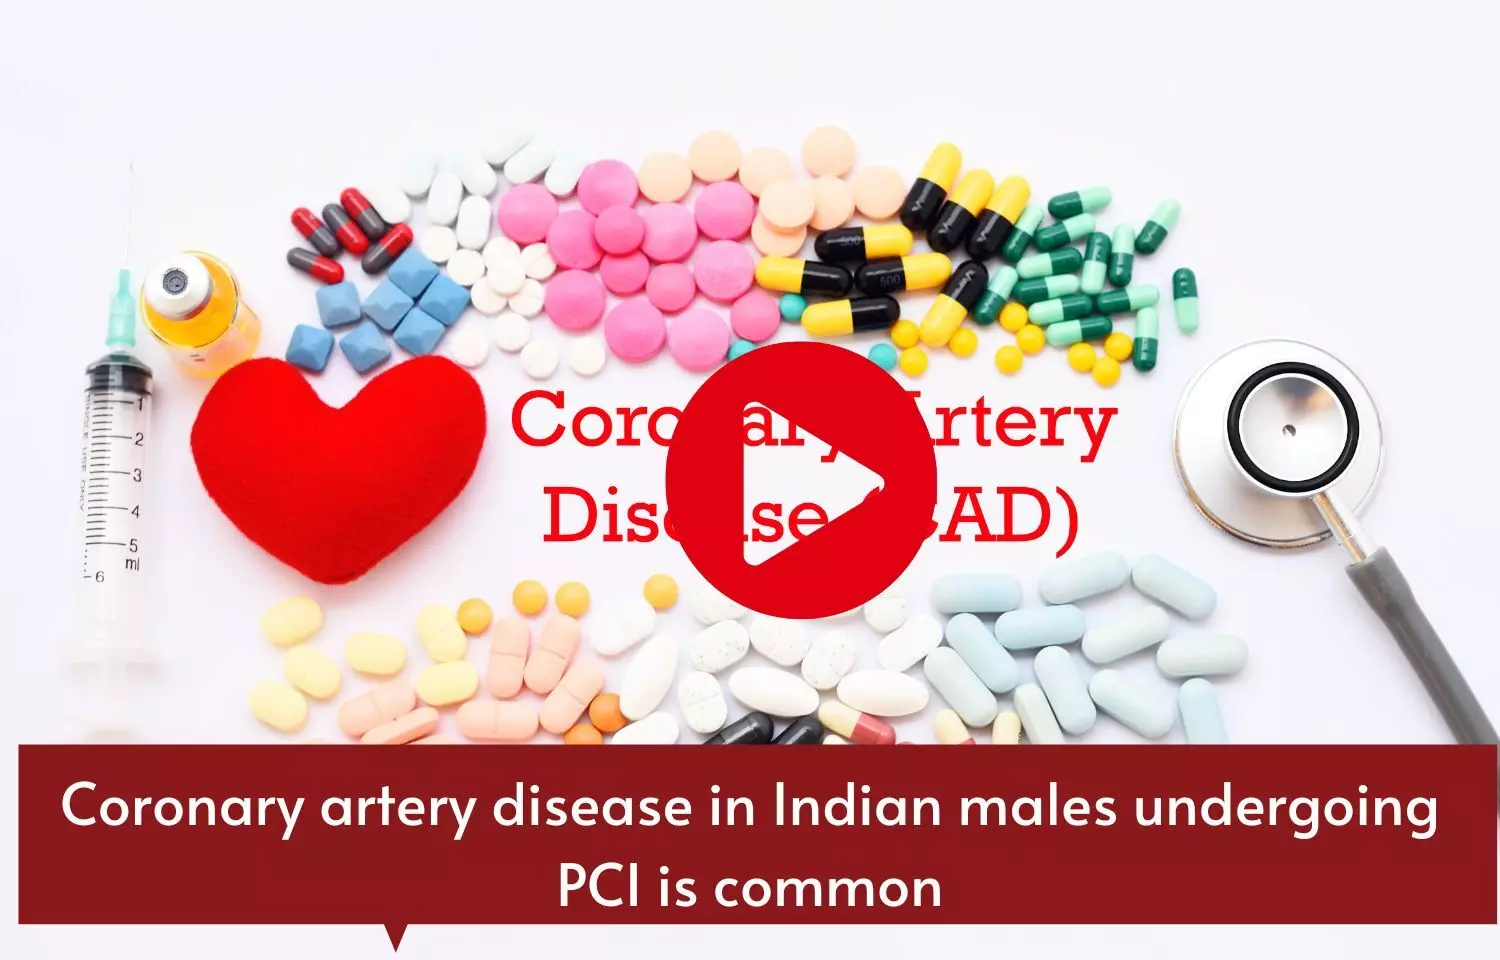 Coronary artery disease in Indian males undergoing PCI is common